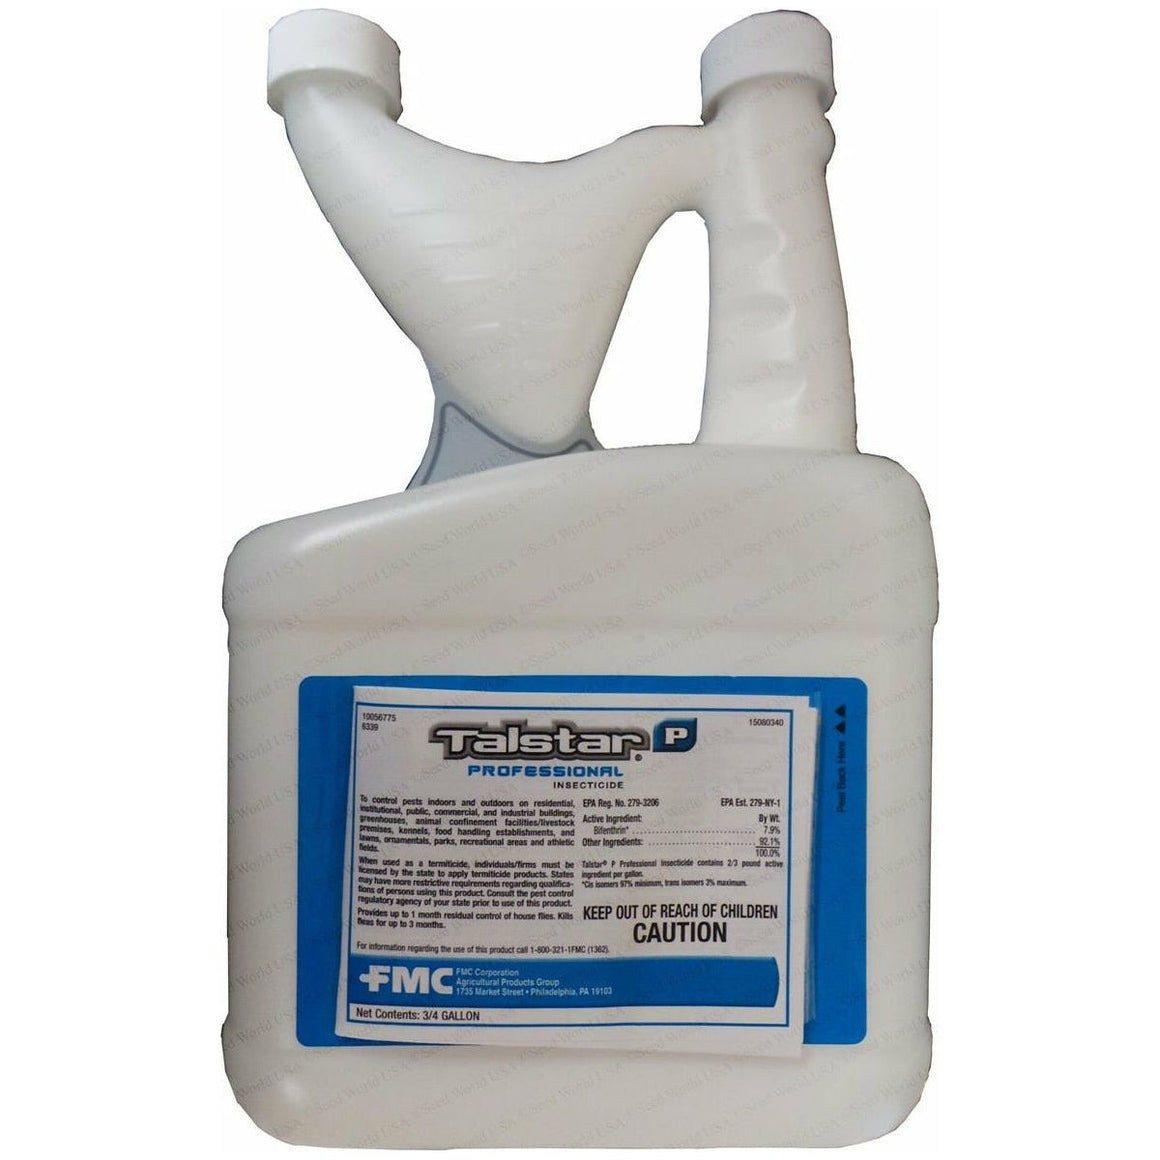 Talstar P Profesional Insecticide - 3/4 Gal. - Seed World